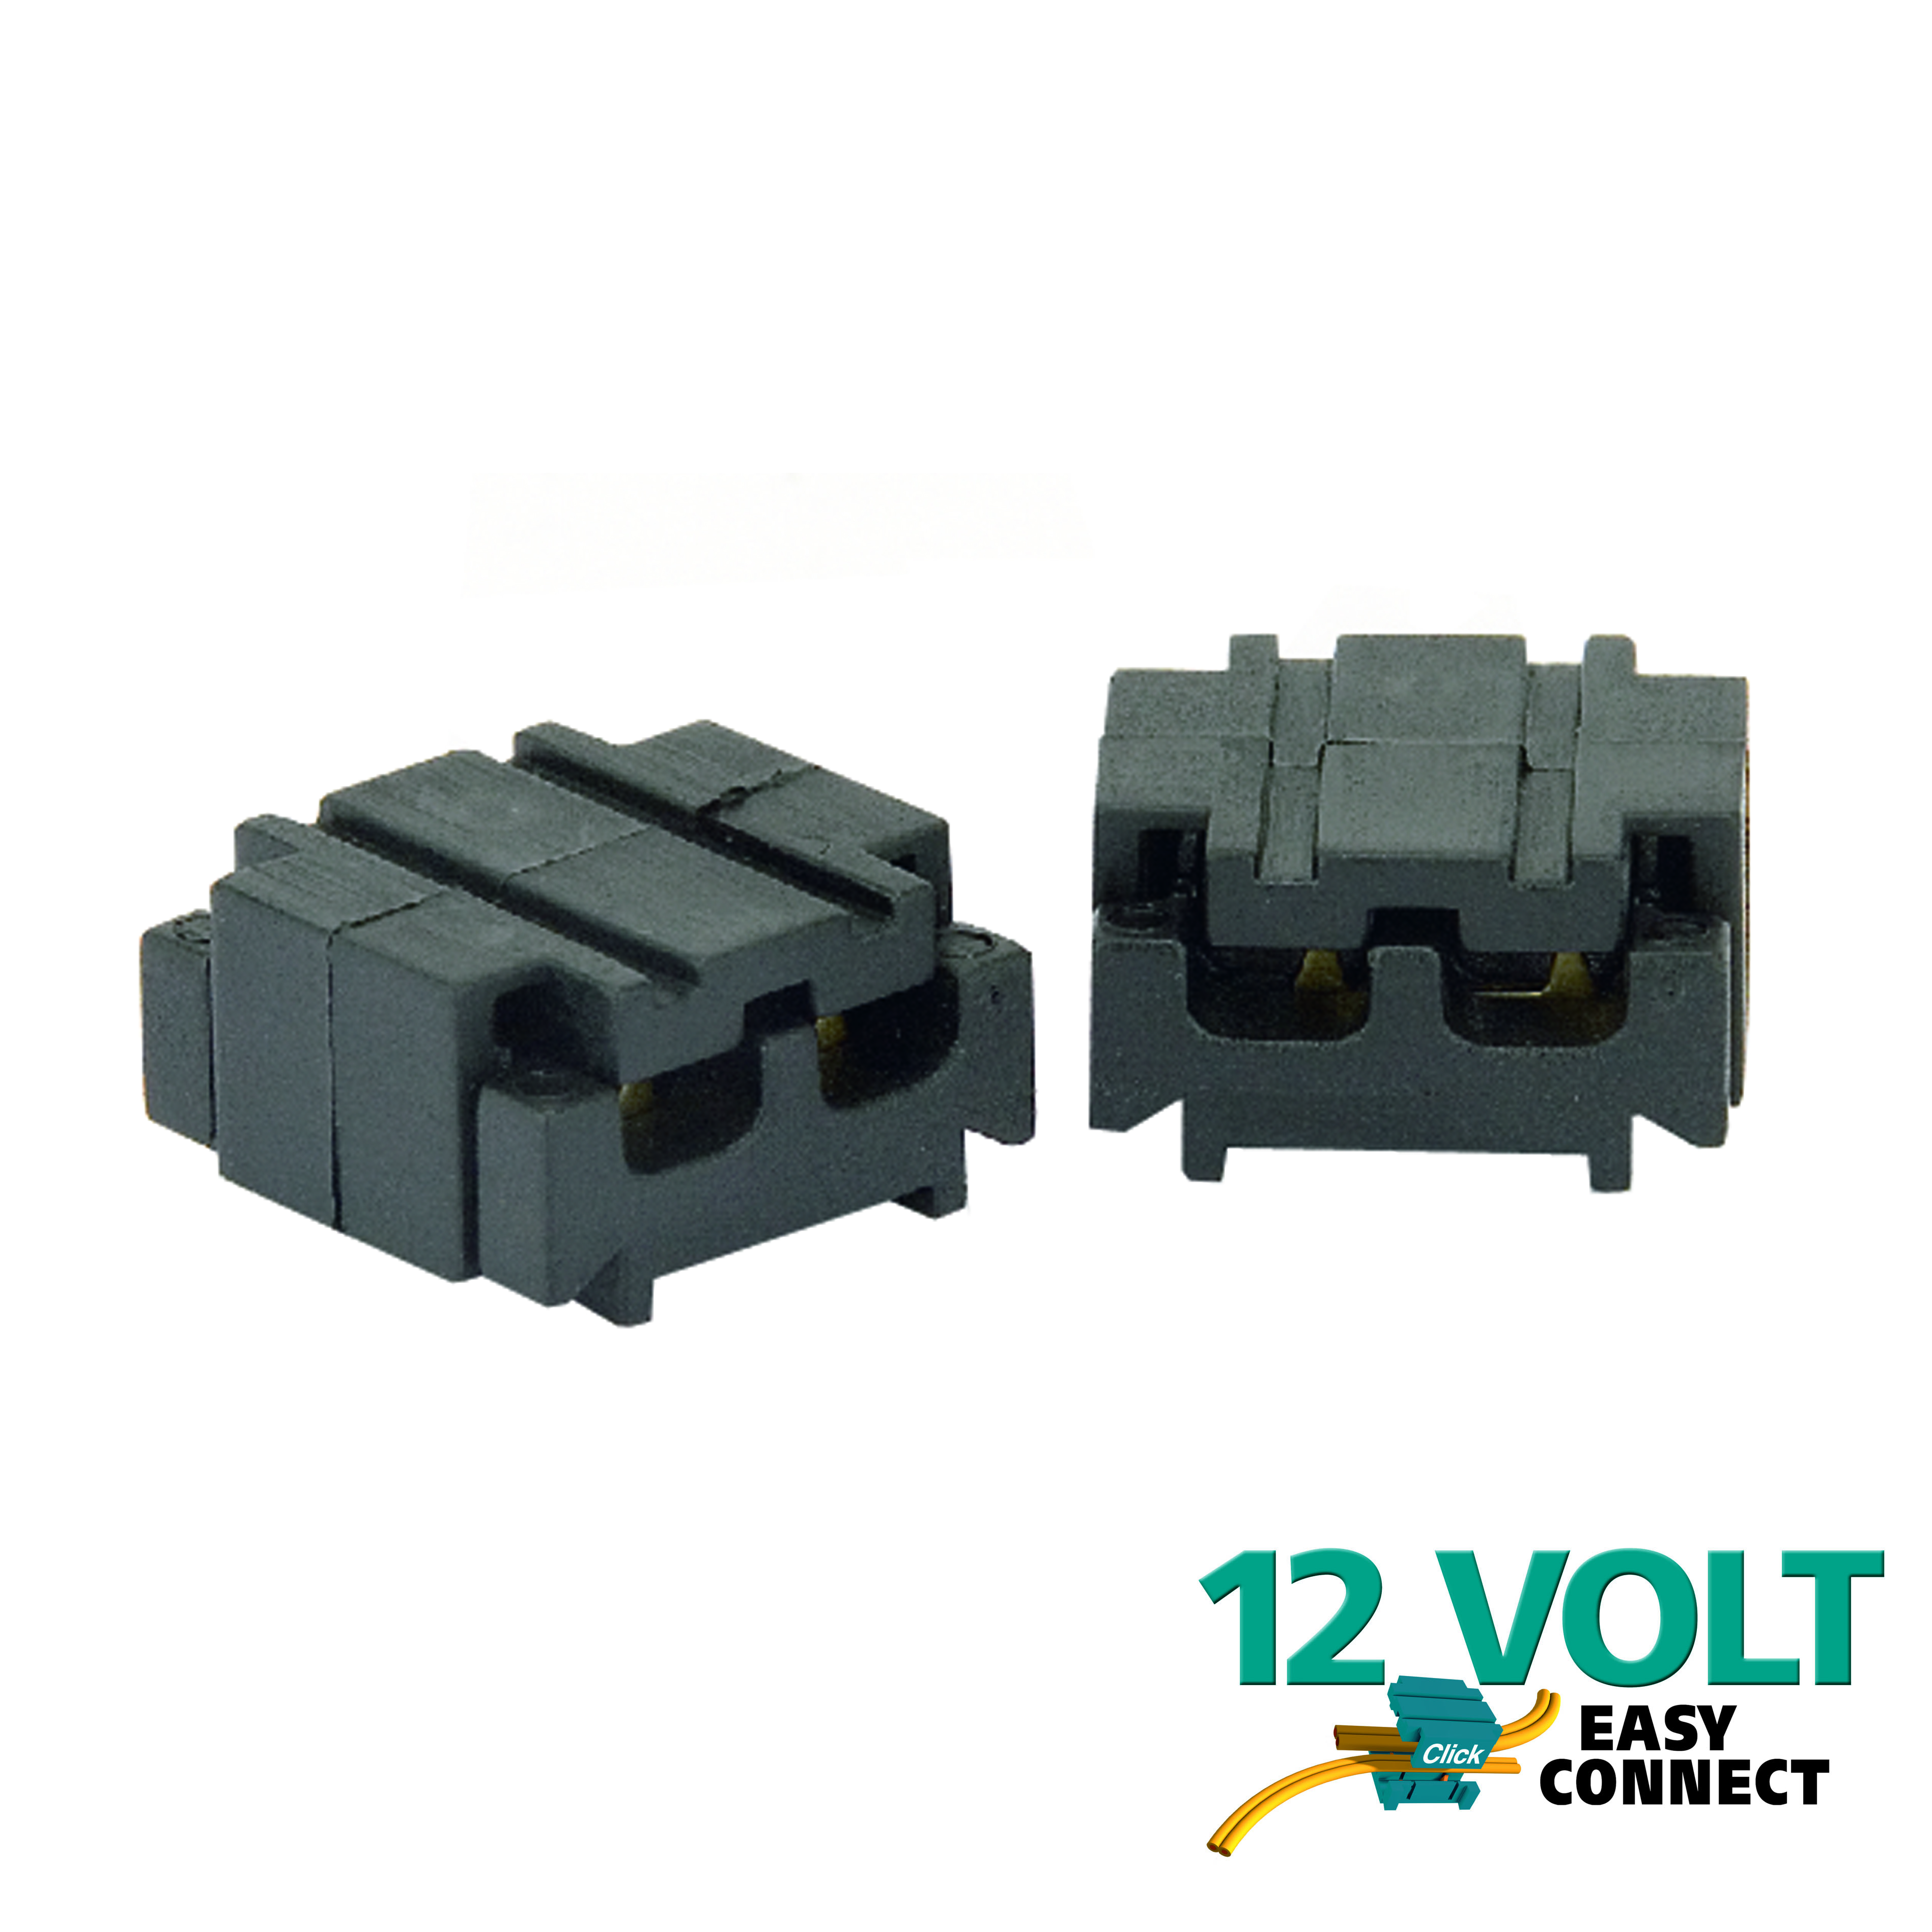 Luxform SPT3 to SPT3 Cable Connector 2 Pack